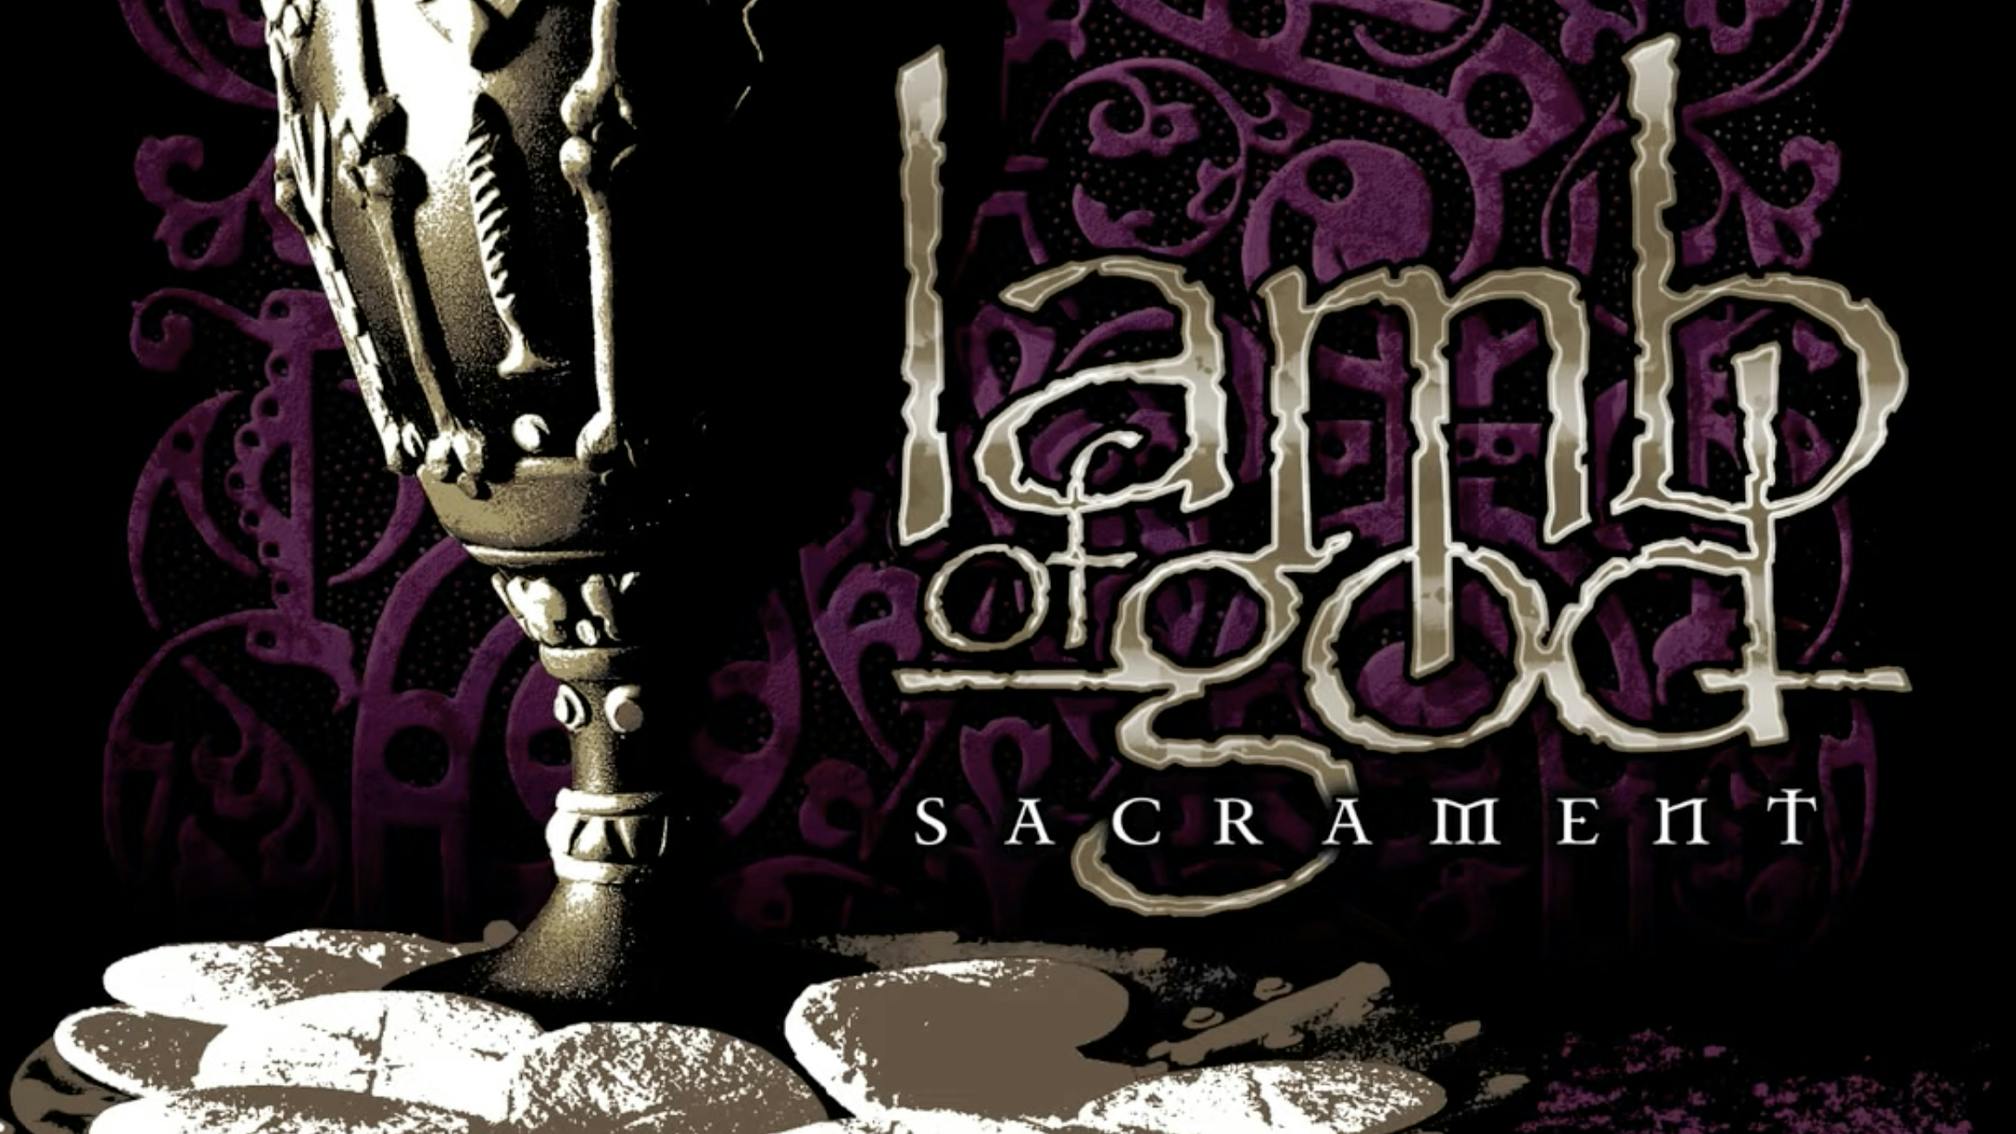 “The sound of master craftsmen flexing their creative muscles”: Our original 2006 review of Lamb Of God’s Sacrament